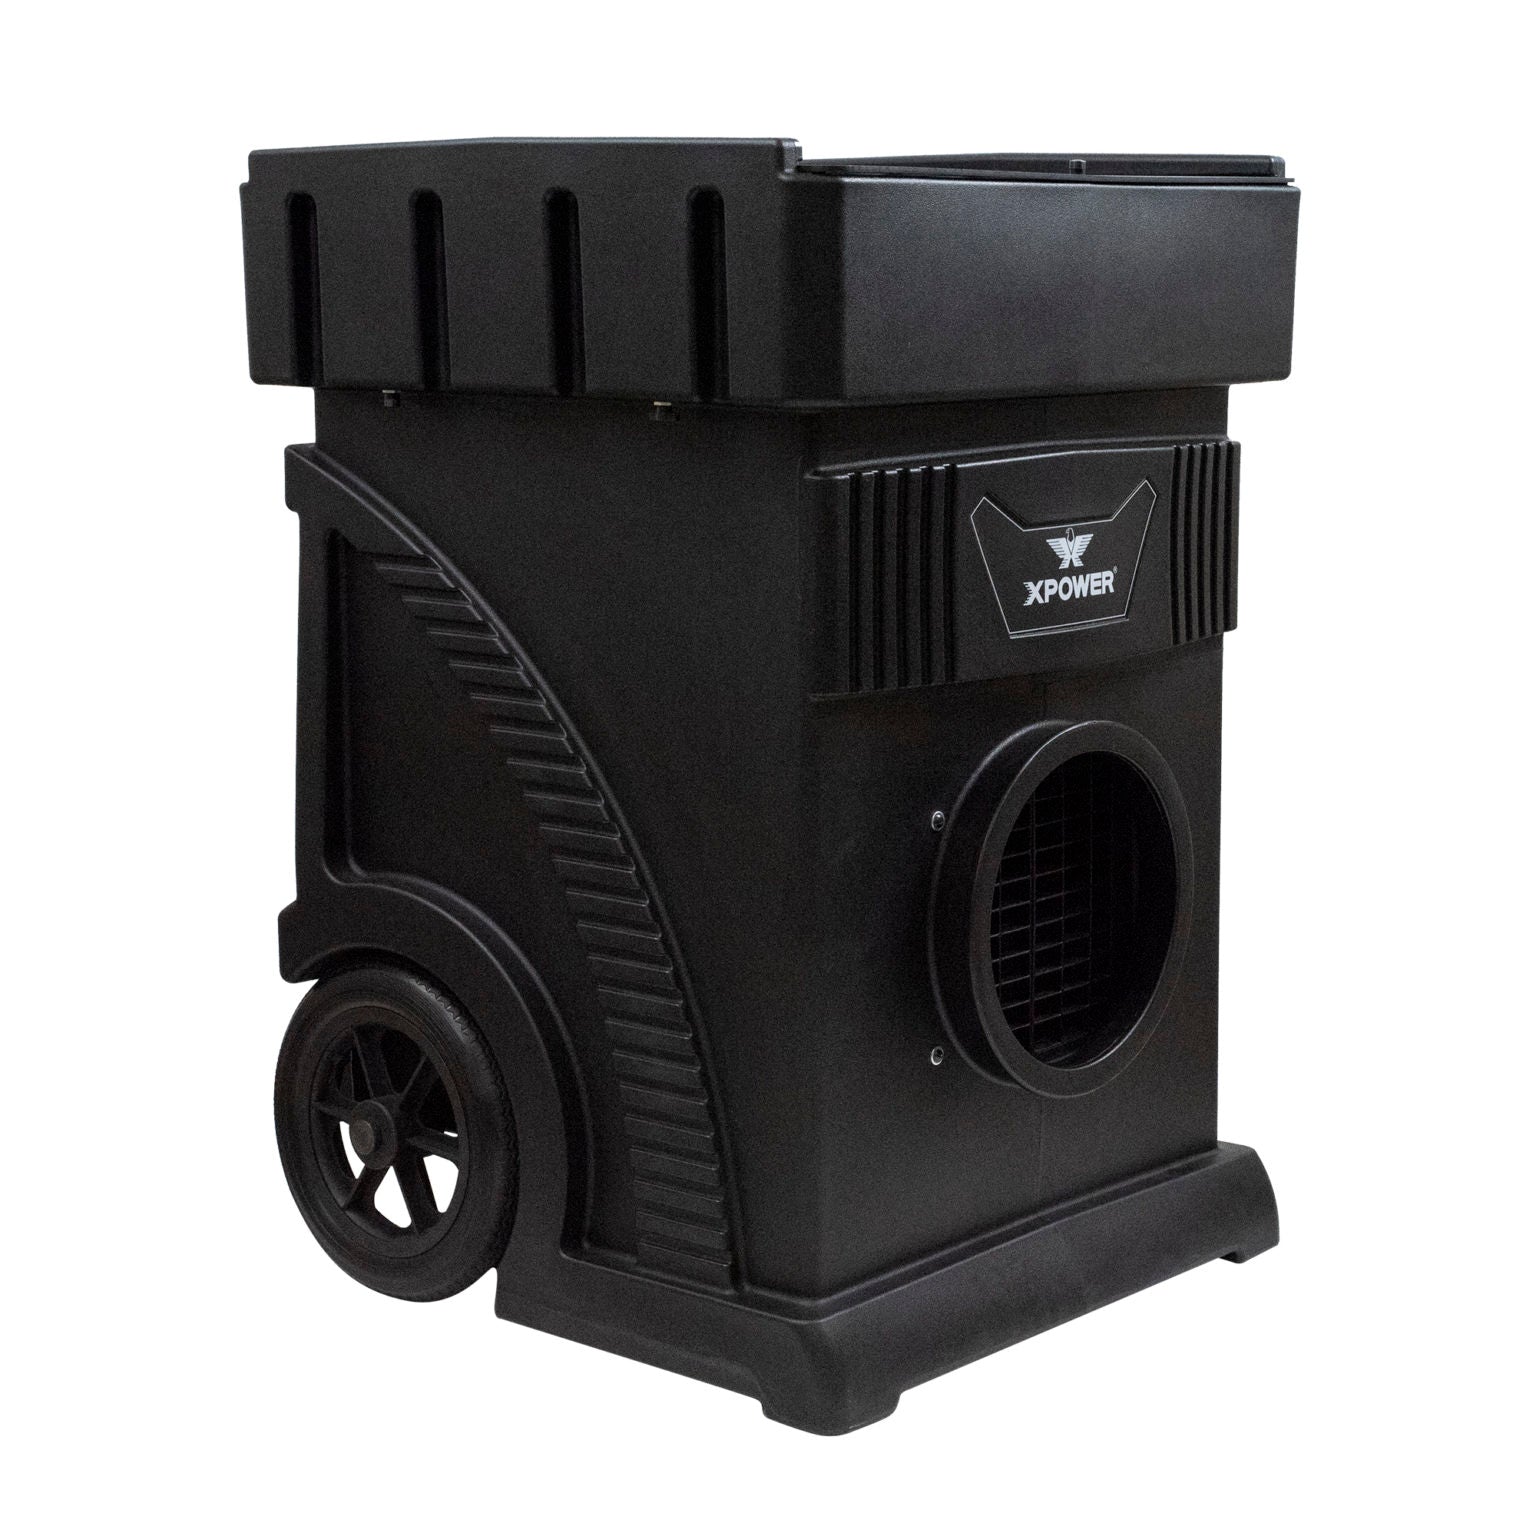 XPOWER AP-2500D Air Filtration System